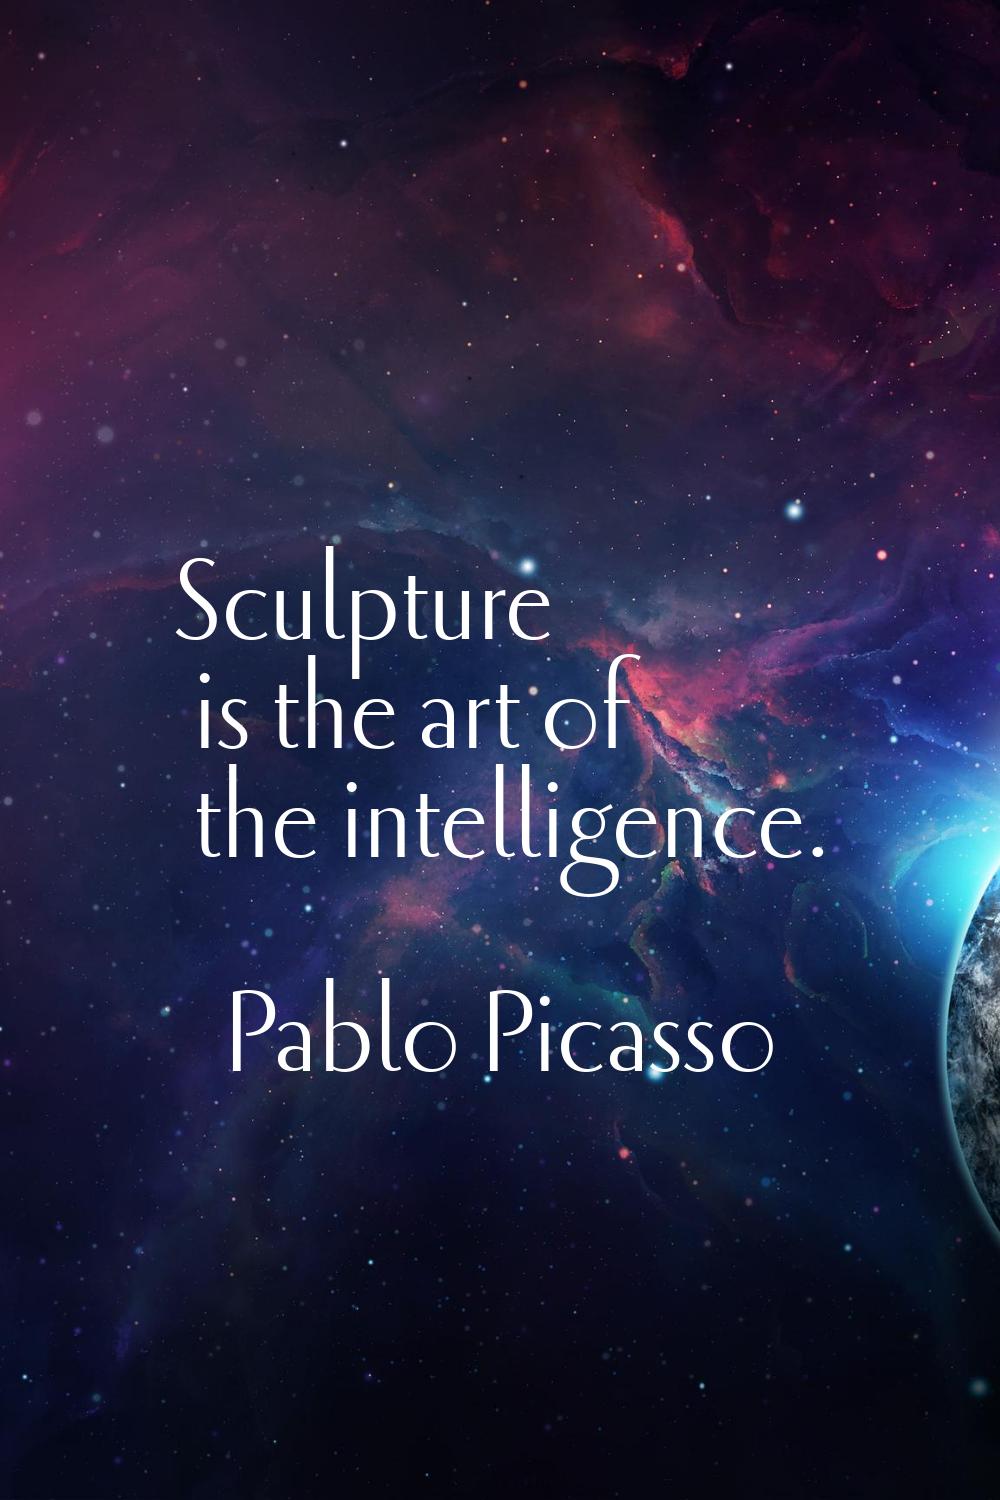 Sculpture is the art of the intelligence.